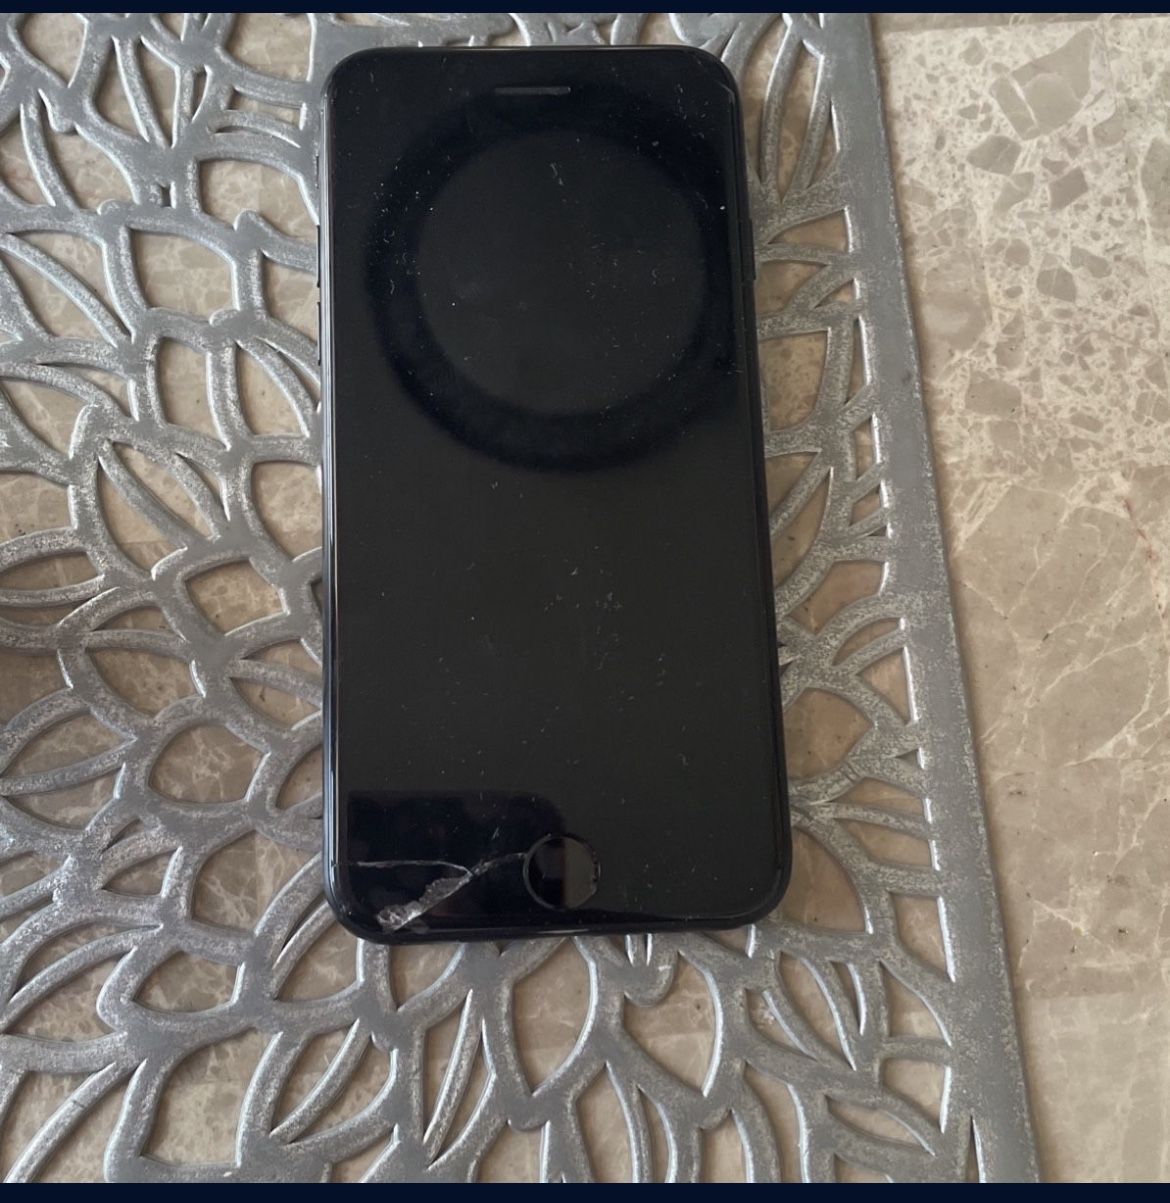 iPhone 7 Plus In Decent Condition Works Perfectly Unlocked